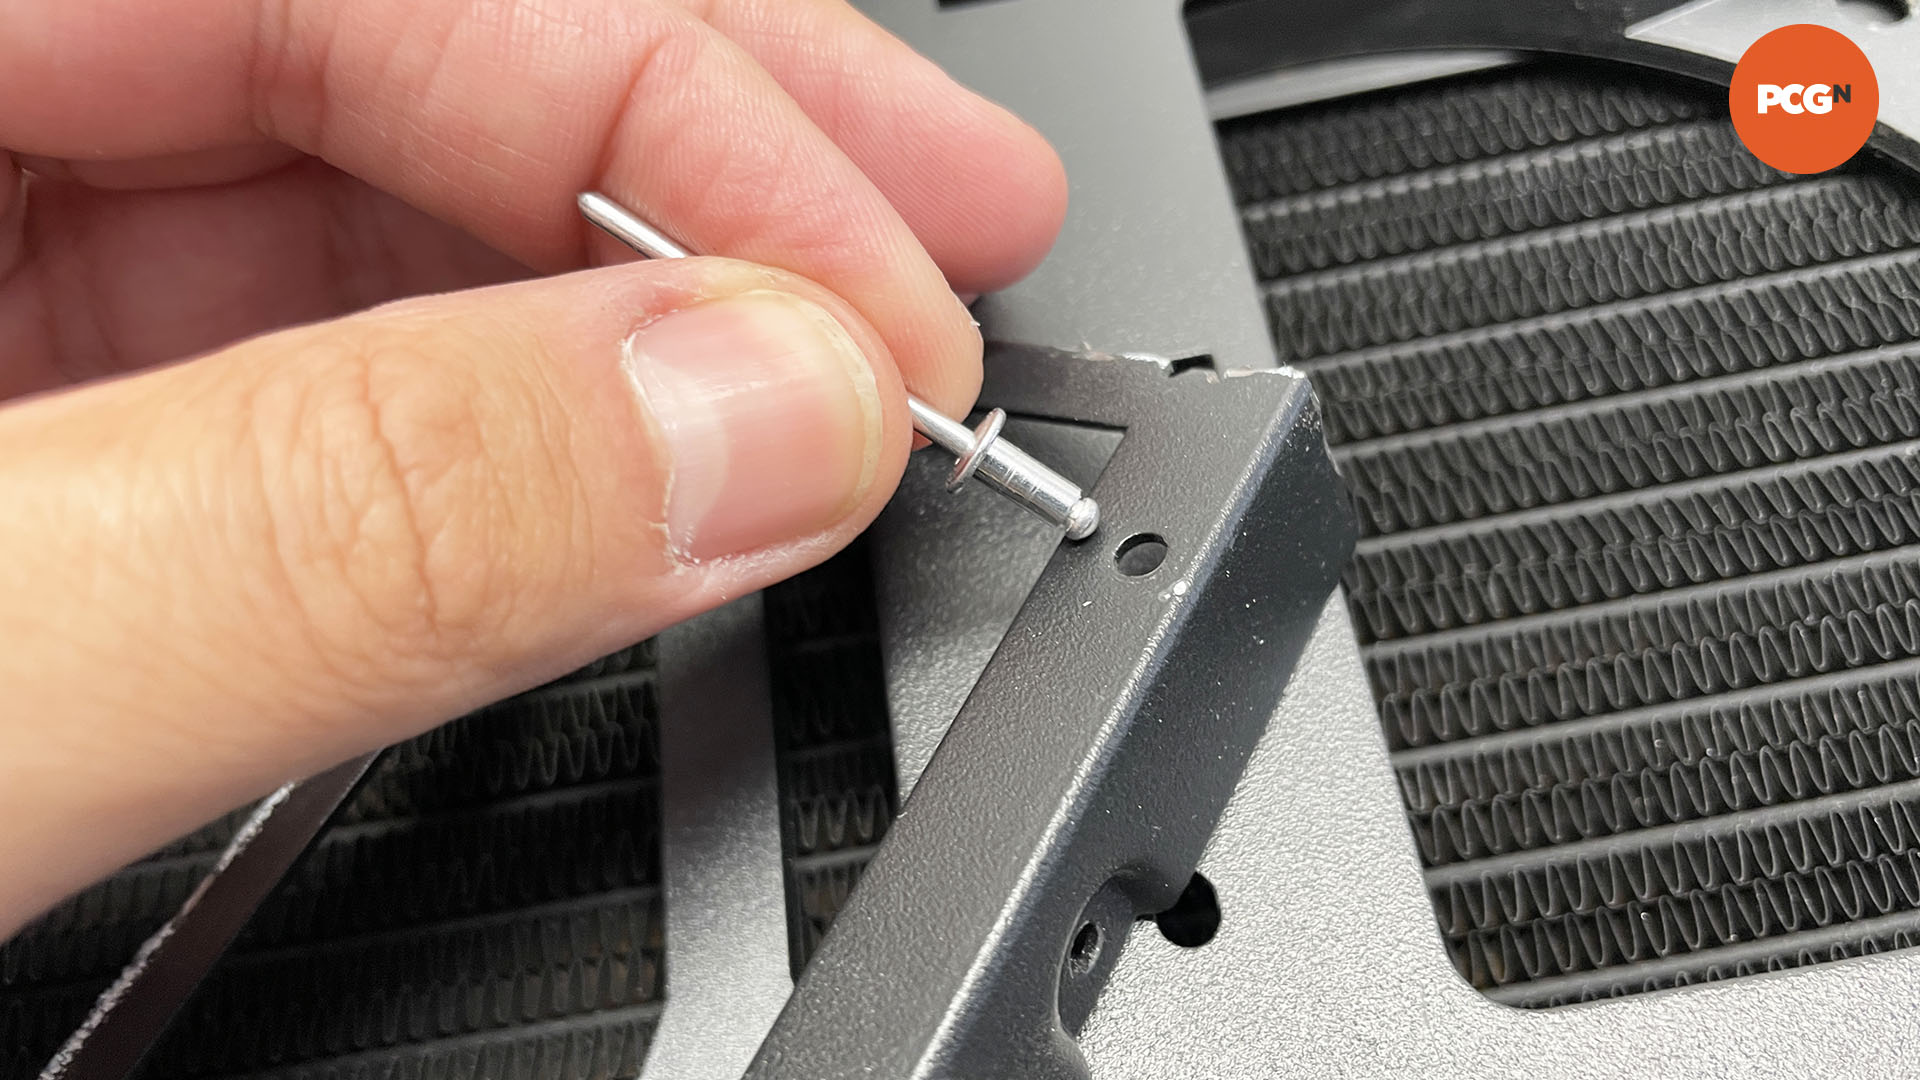 How to move the motherboard tray in your PC case: Use the right rivets